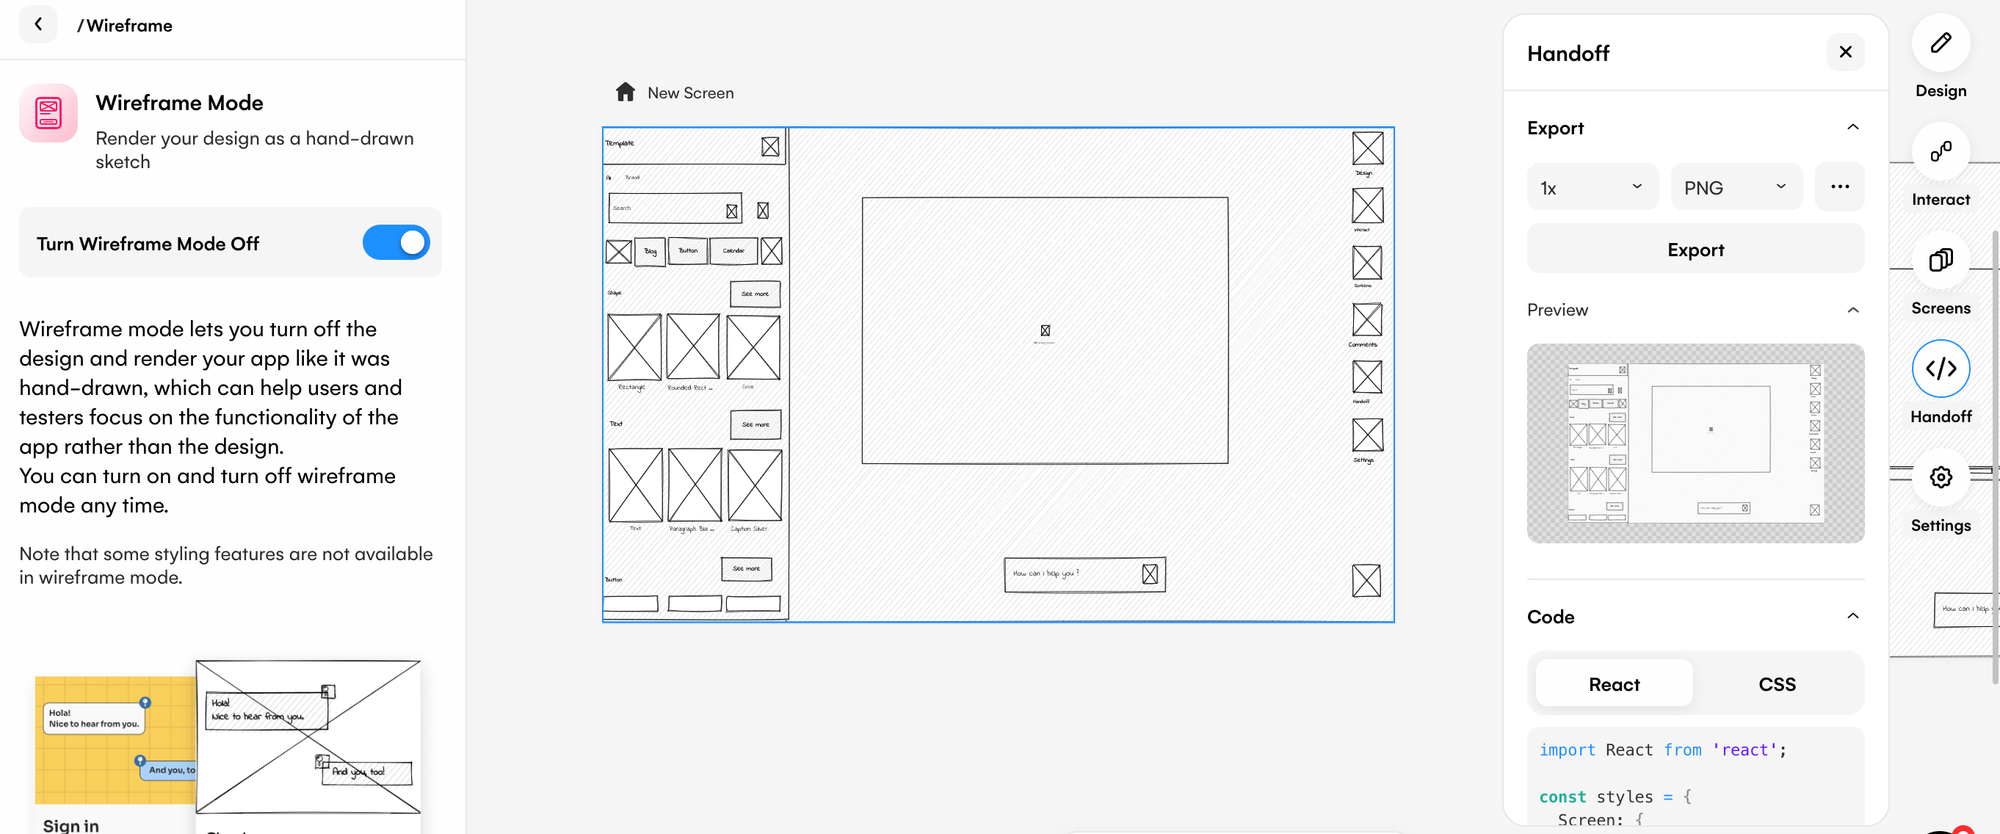 The benefits of Wireframe Mode for product teams